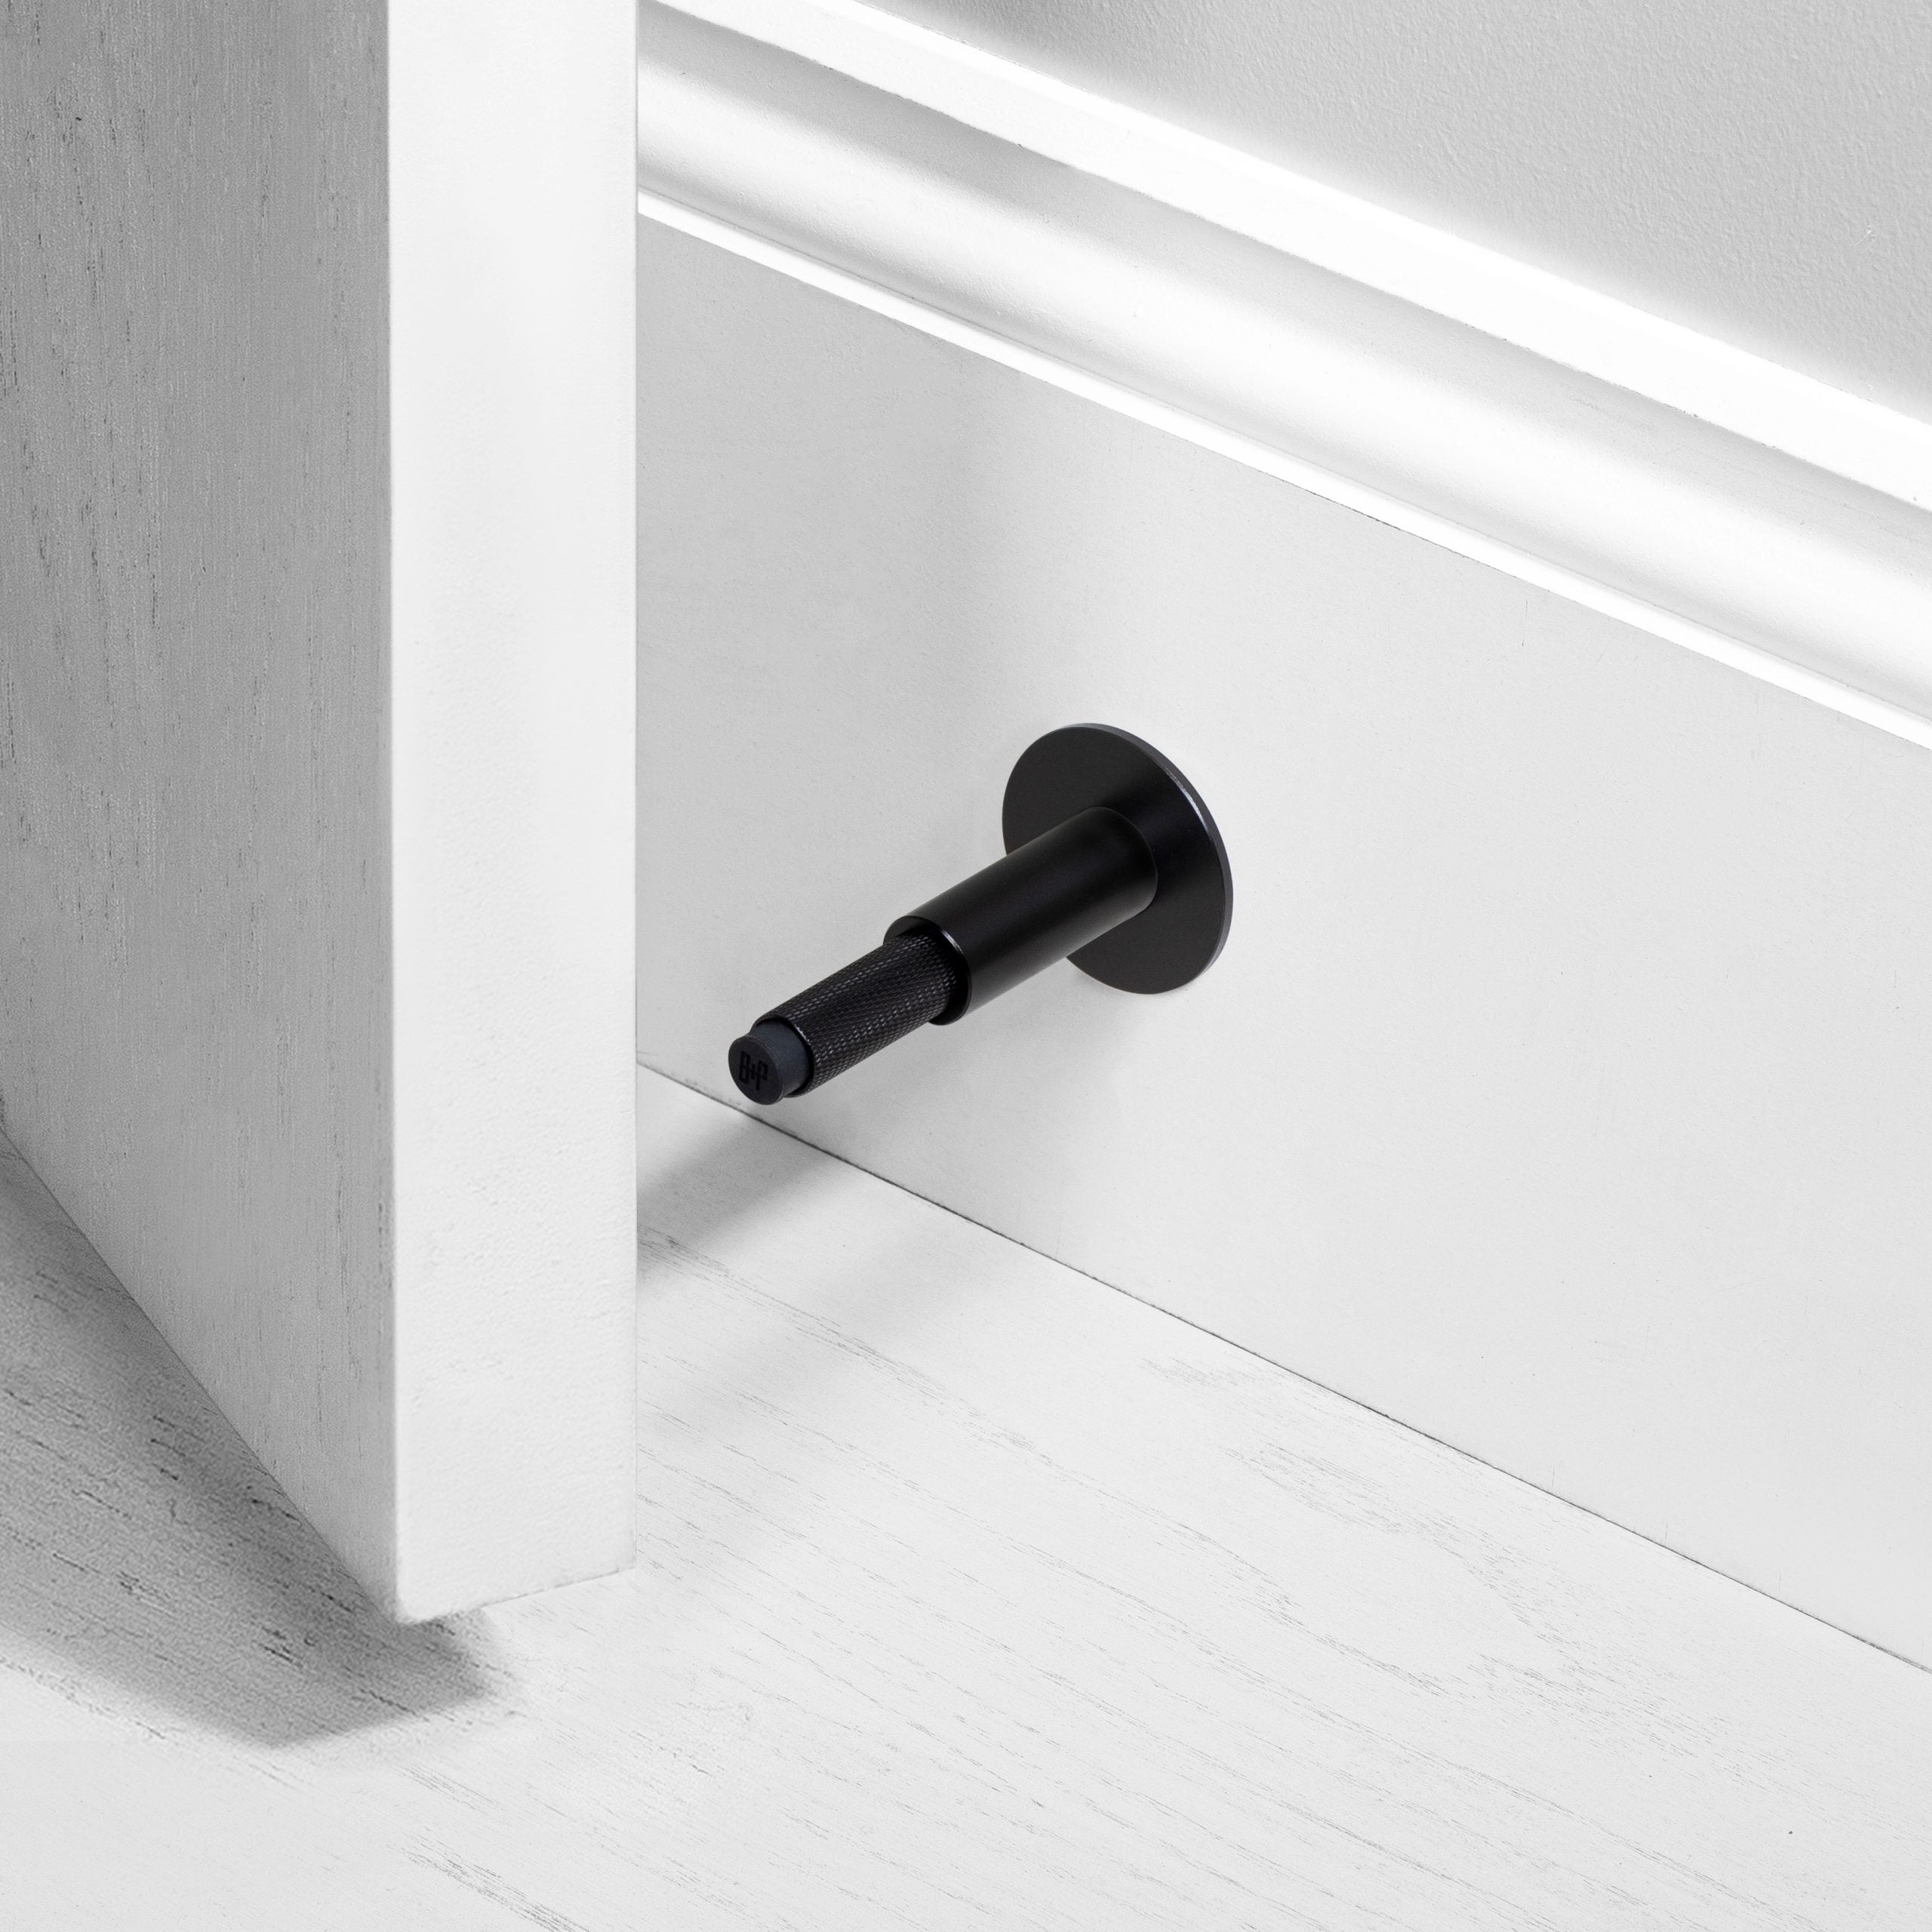 Buster + Punch Wall Mounted Door Stop Hardware Buster + Punch   